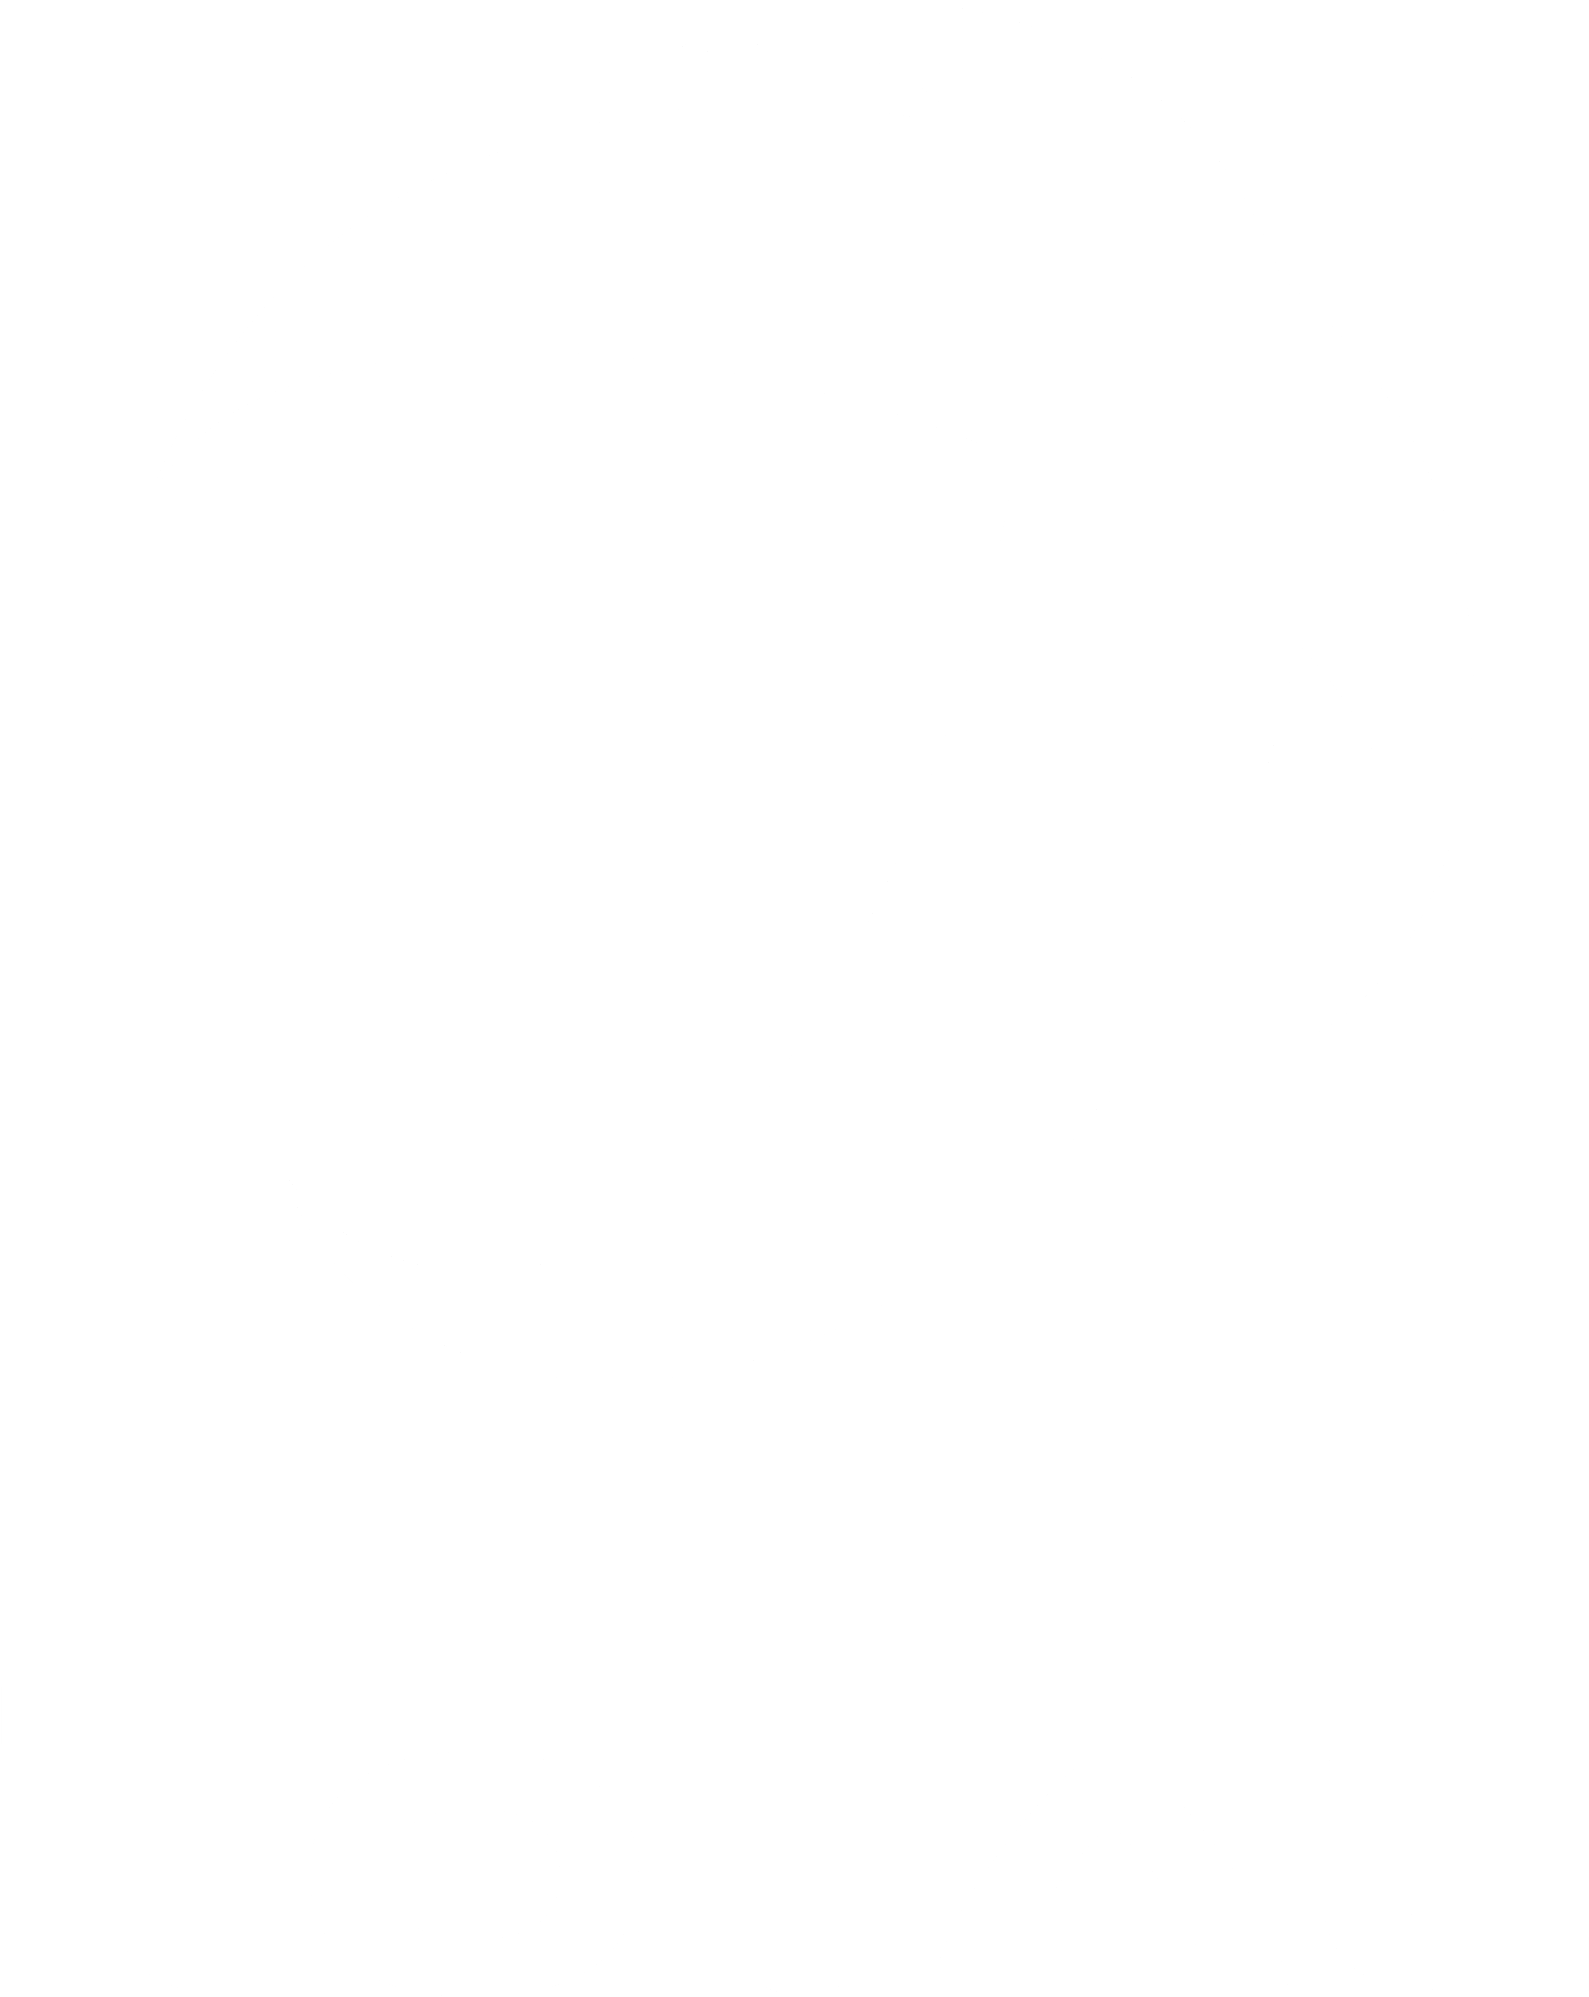 Download Total Logo Black And White Ps4 Logo White Transparent Png Image With No Background Pngkey Com